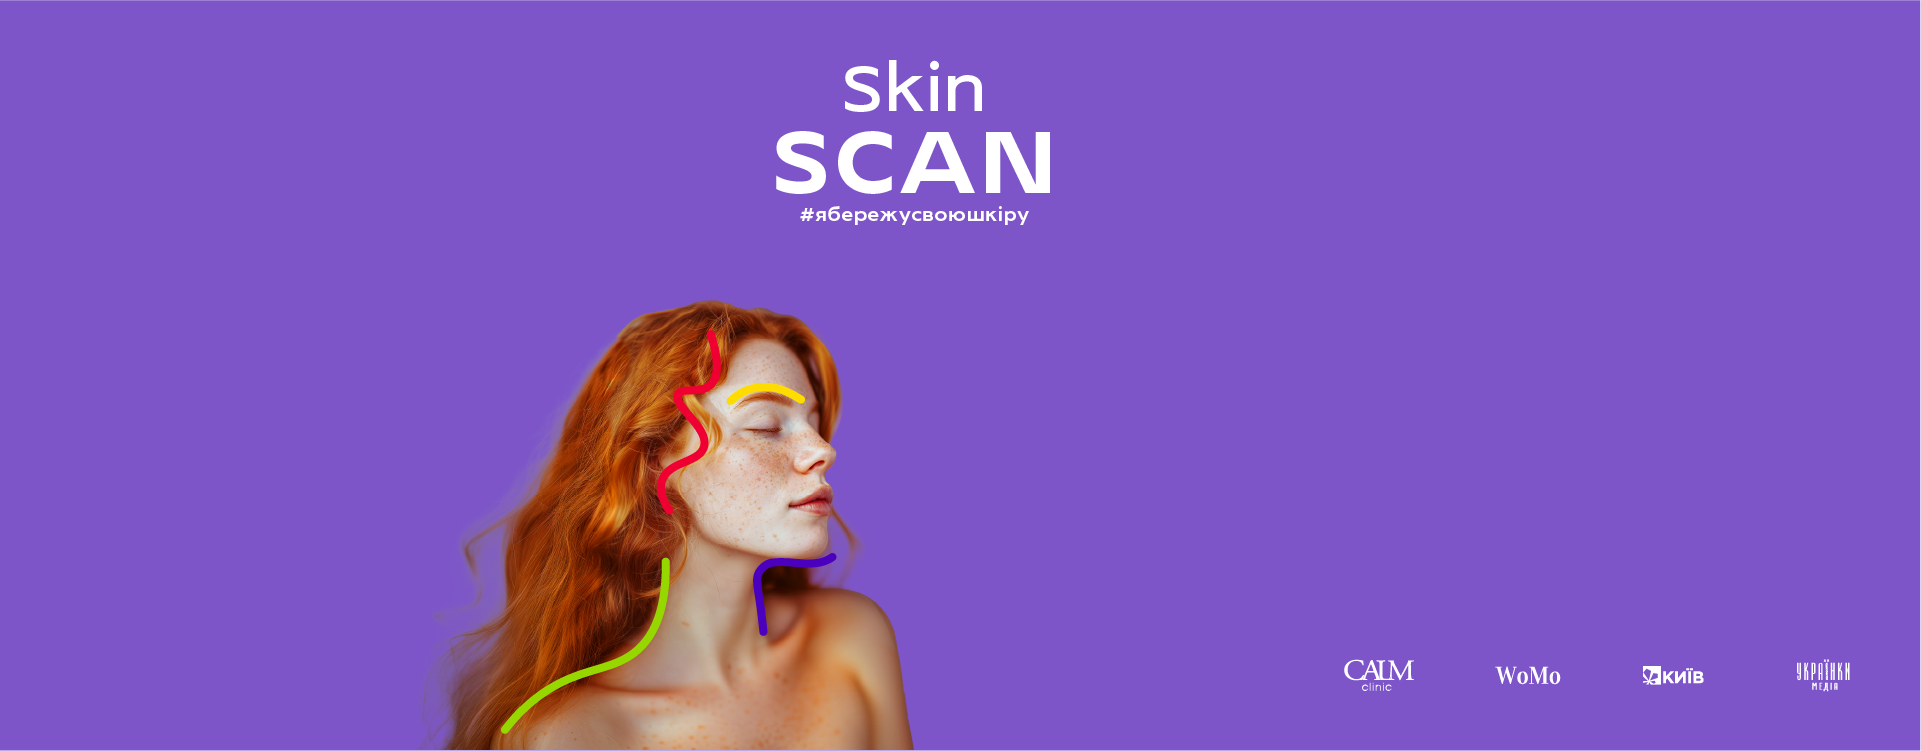 Diagnosis of birthmarks as part of the SkinScan project